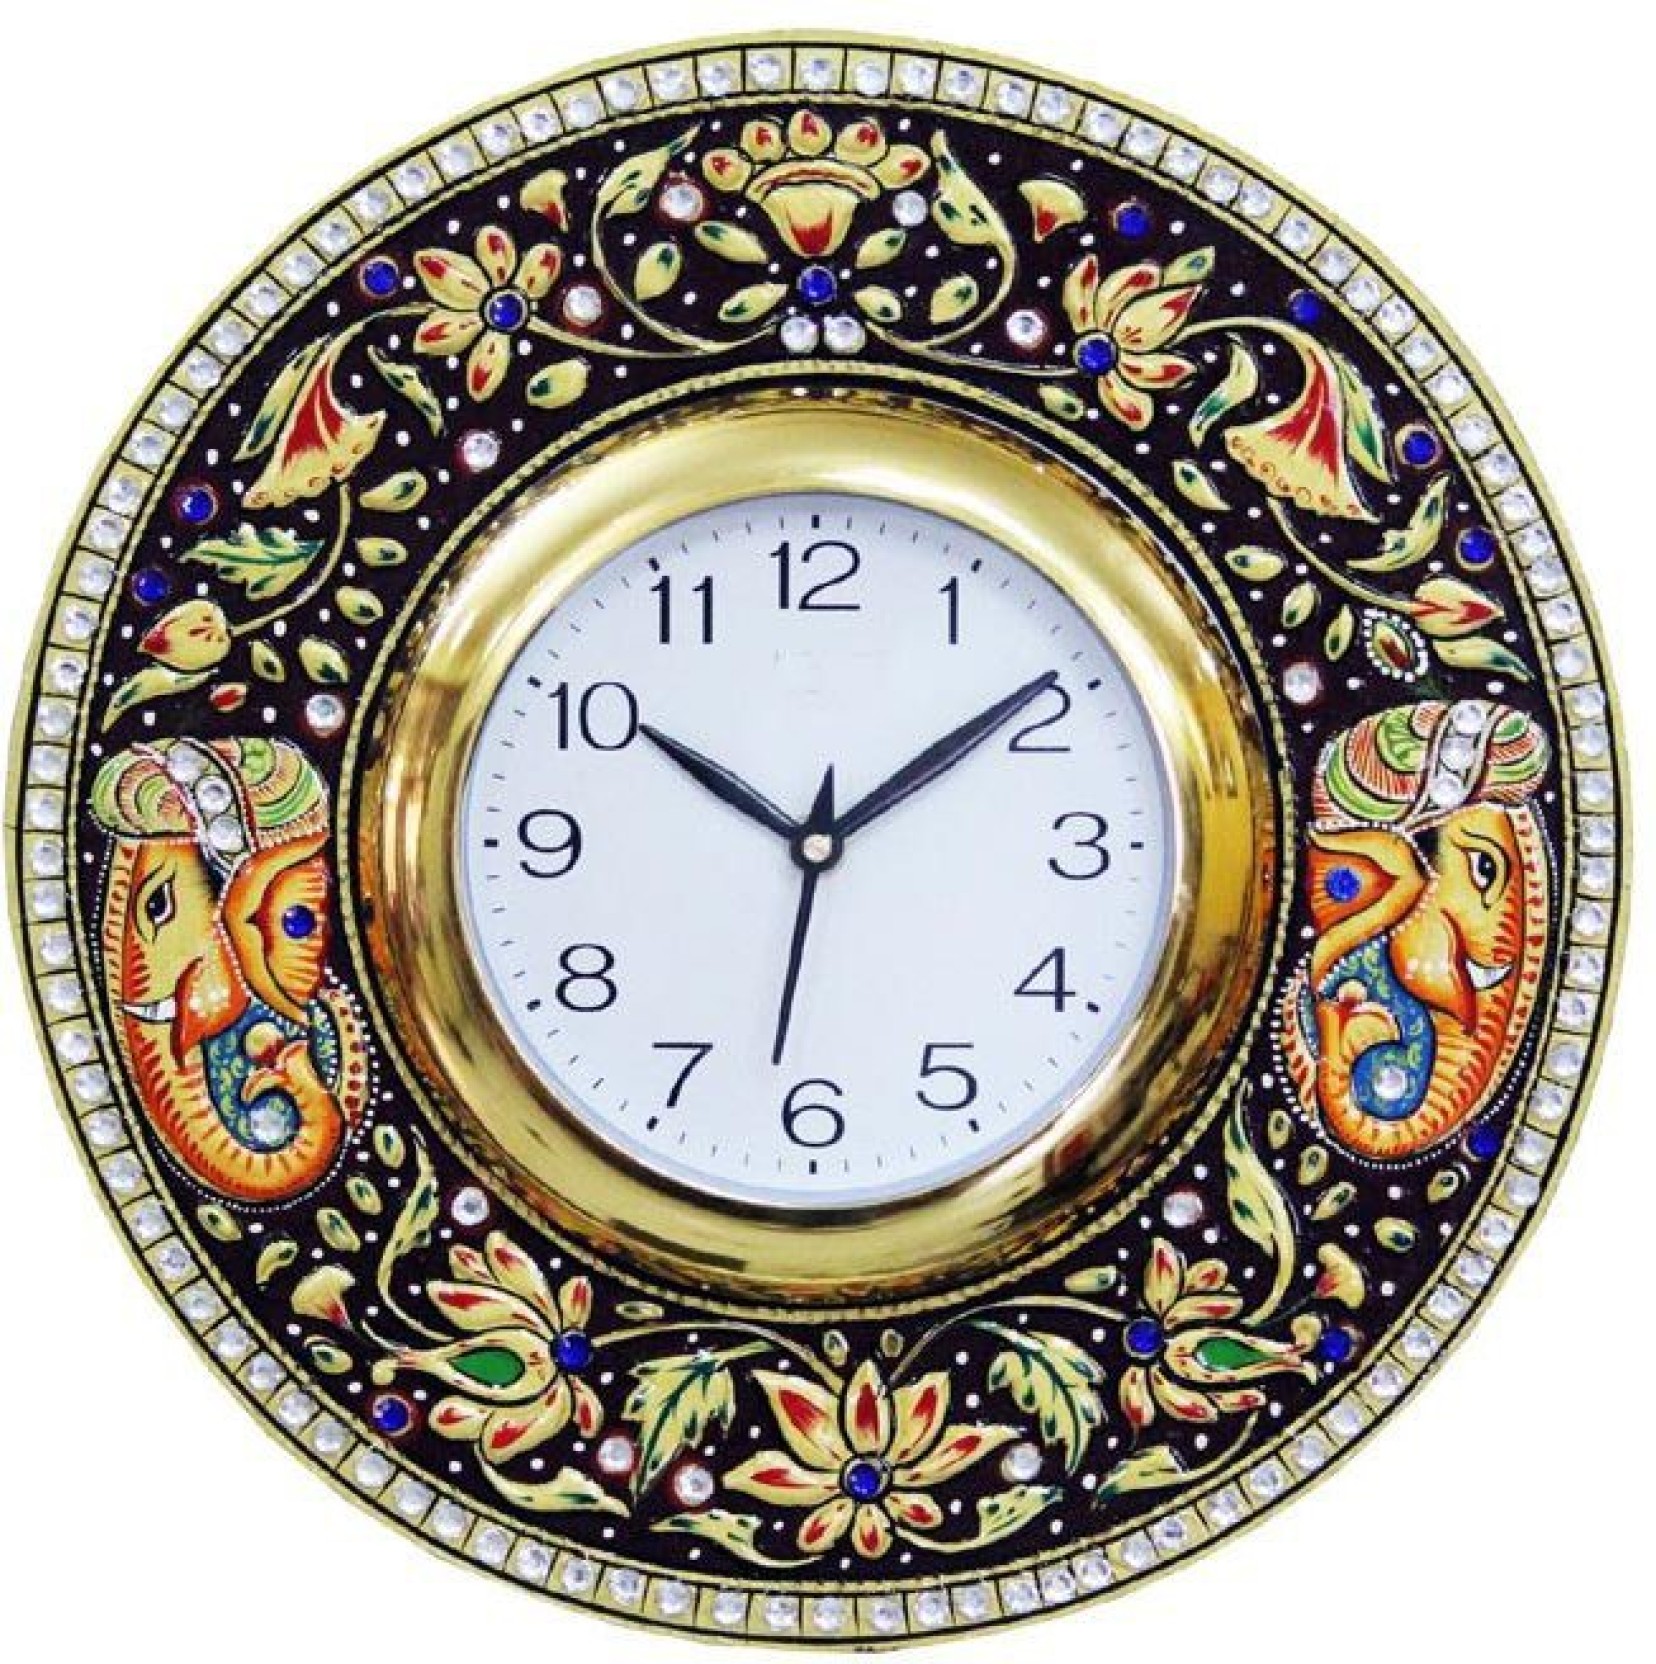 Craft Junction Analog 31 cm Dia Wall Clock Price in India - Buy Craft ...